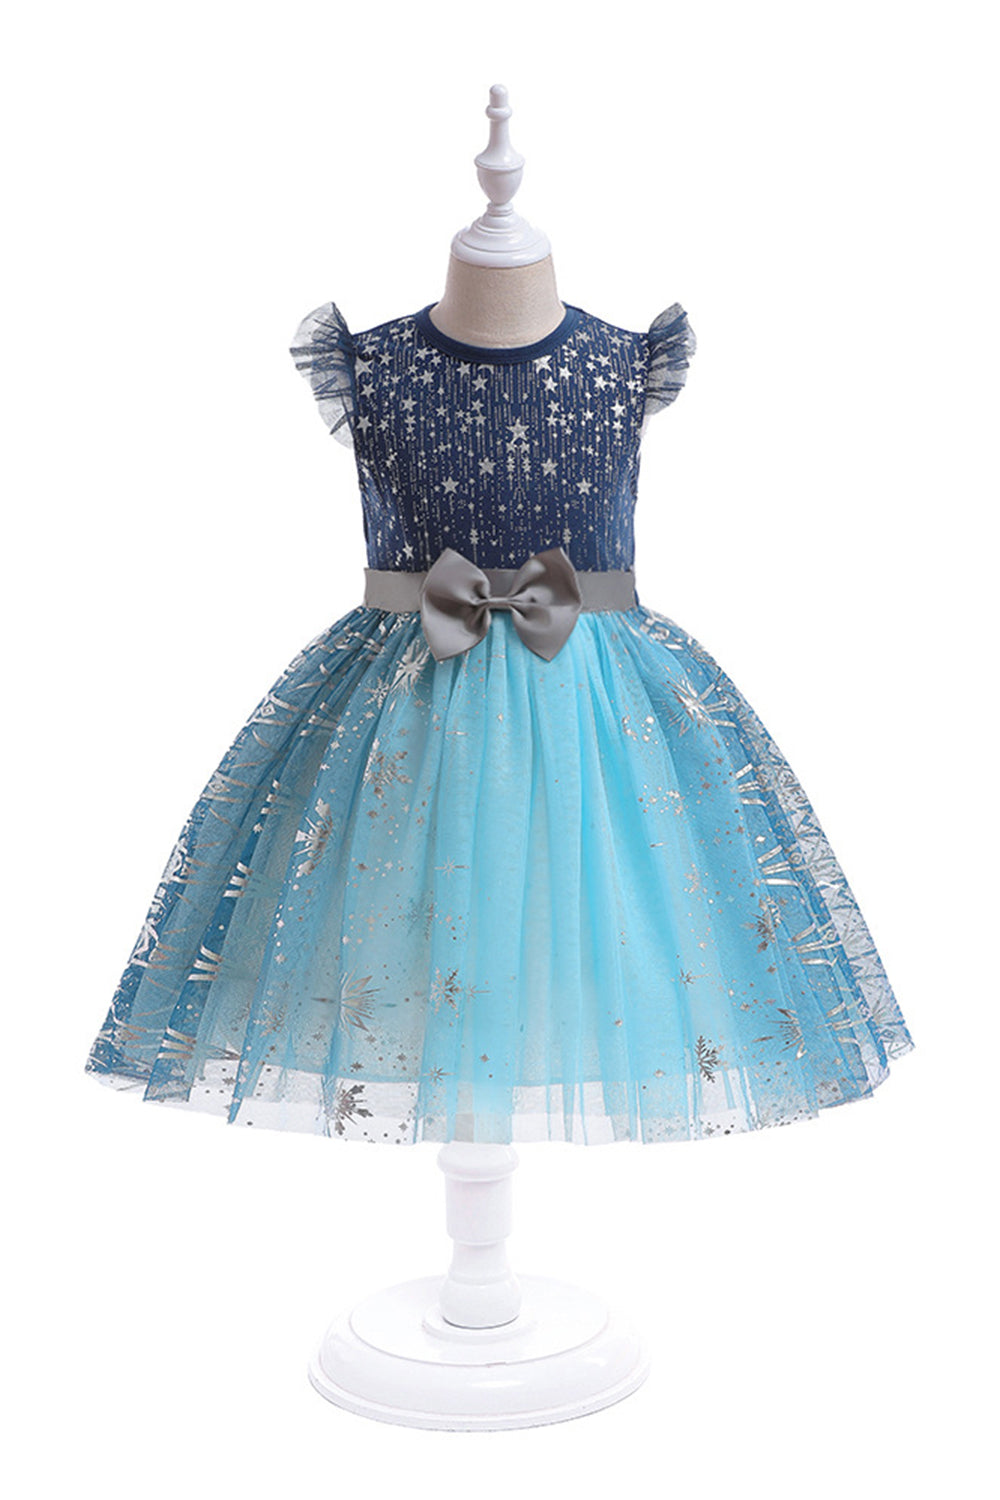 Blue Tulle Glitter Girl's Party Dress with Bow